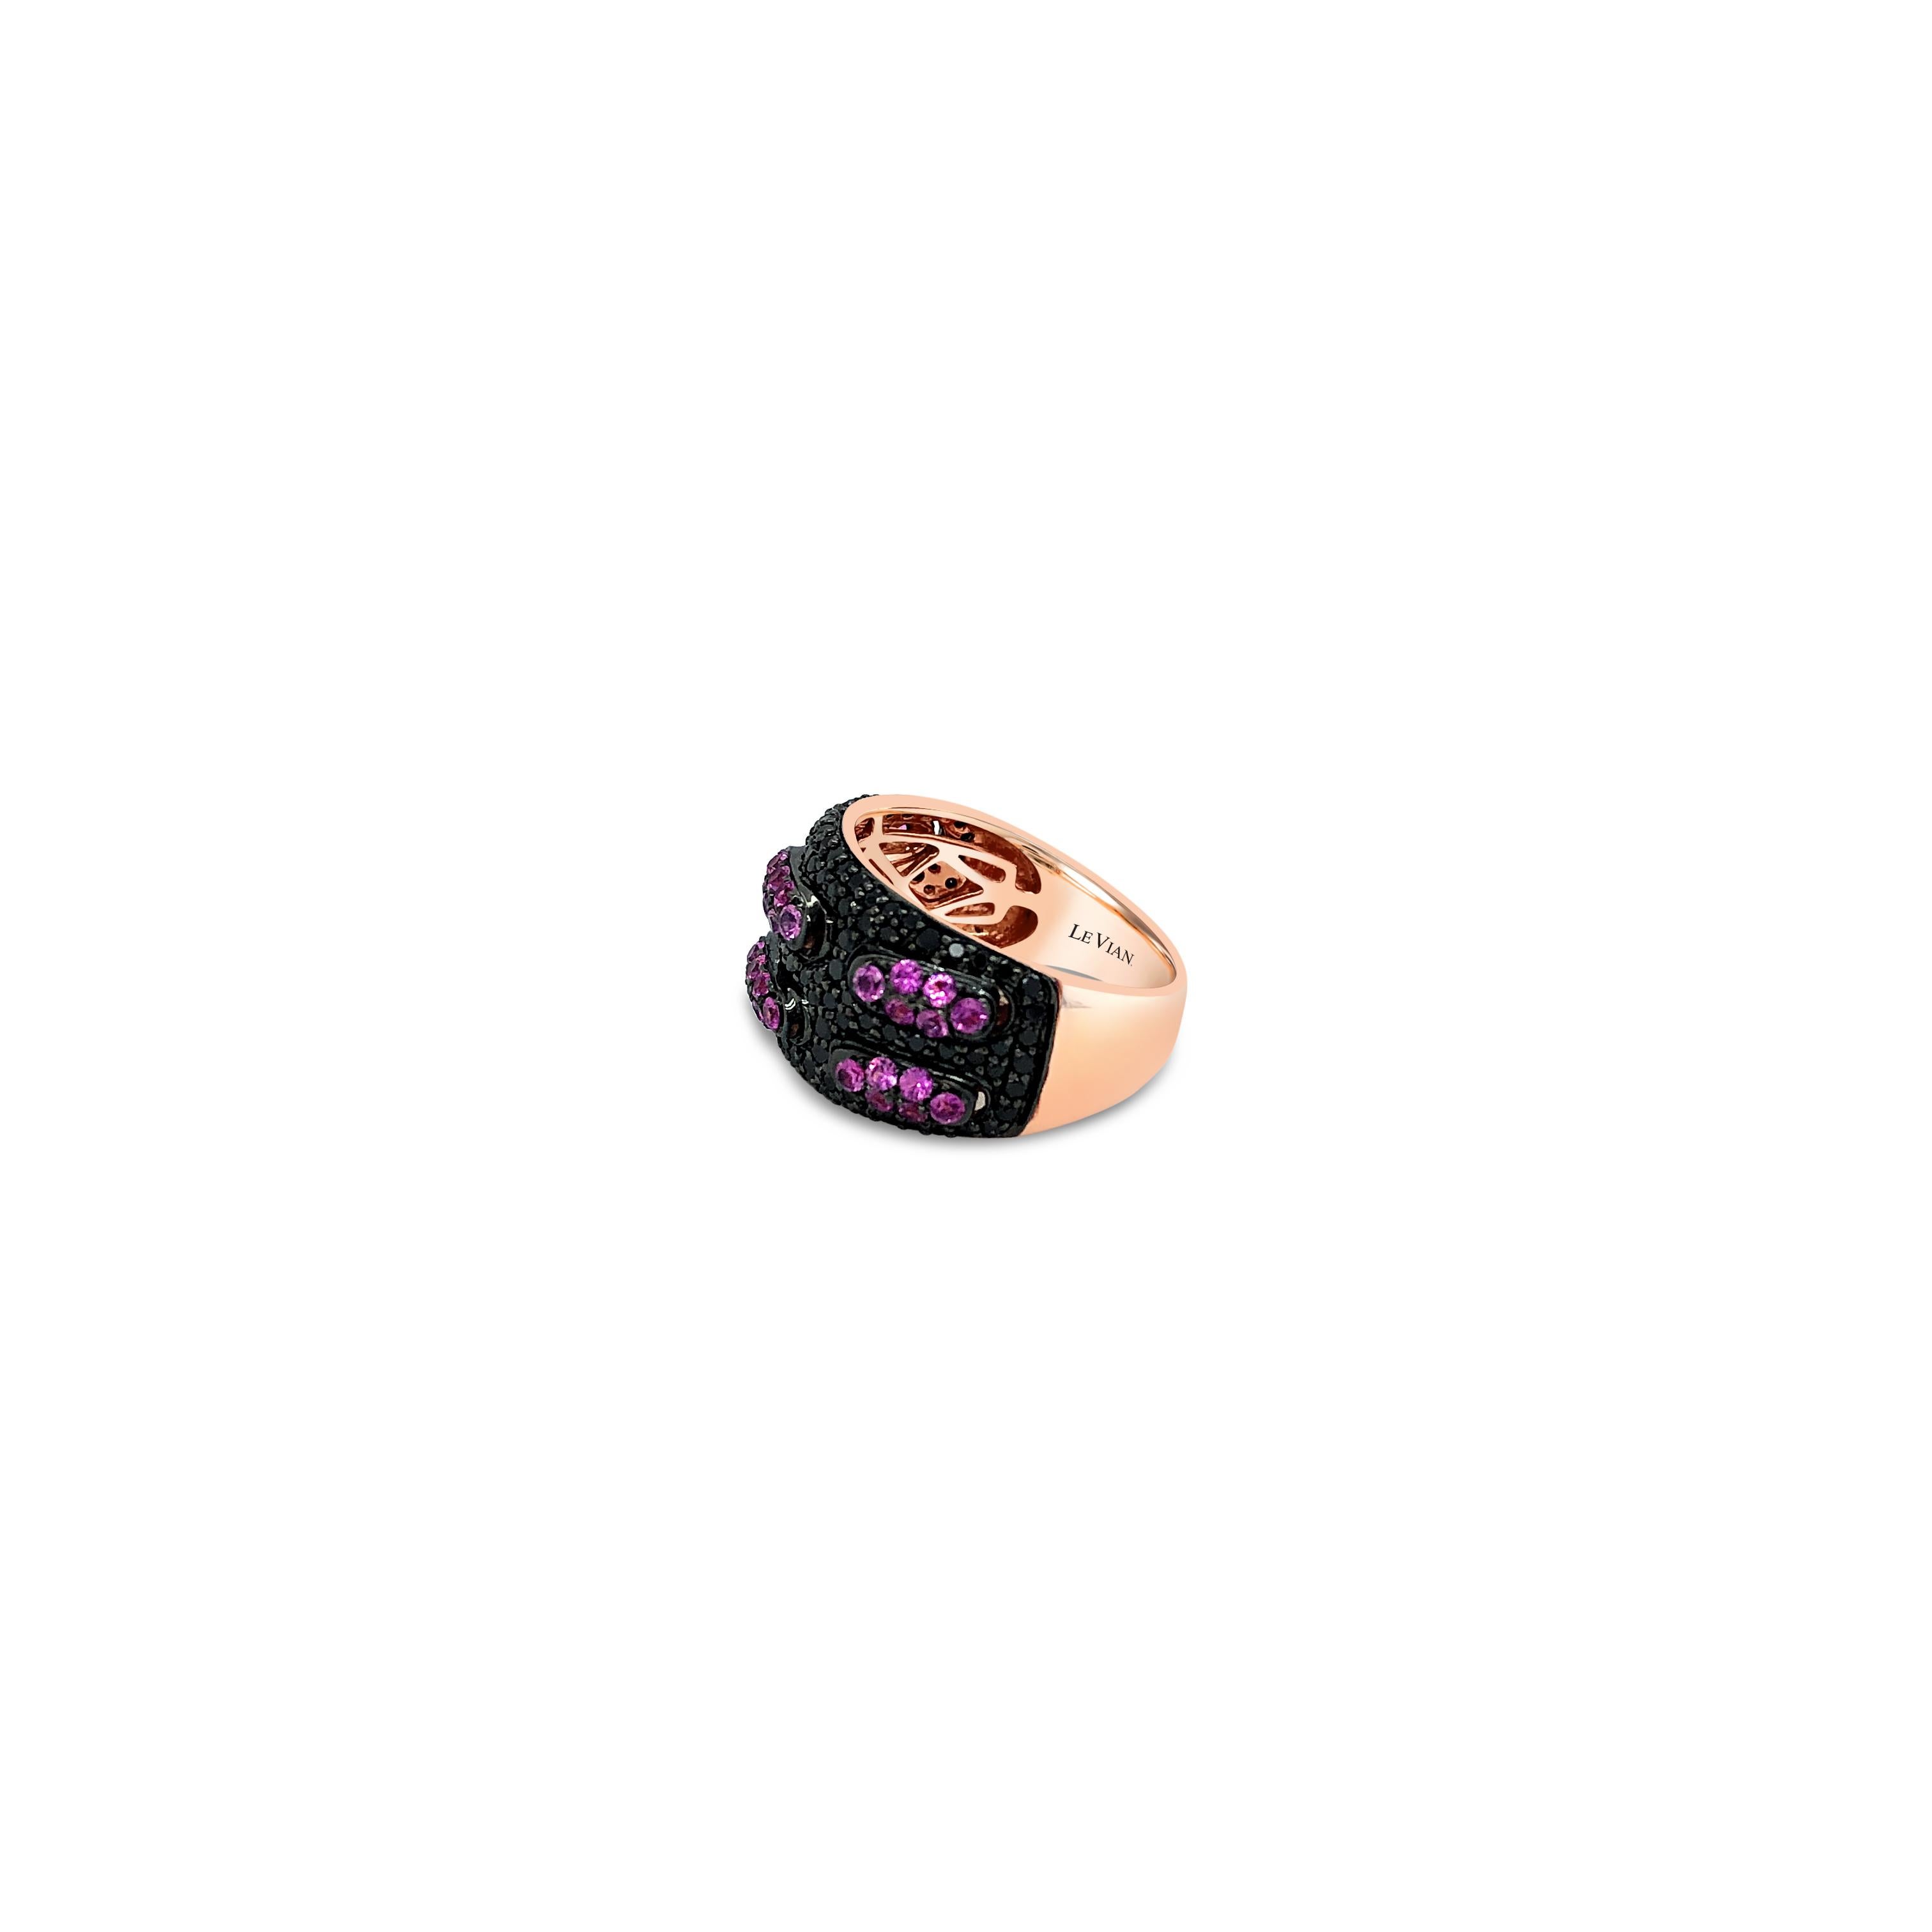 Le Vian® Ring featuring 7/8 cts. Bubble Gum Pink Sapphire™, 1 cts. Blackberry Diamonds®  set in 14K Strawberry Gold®
